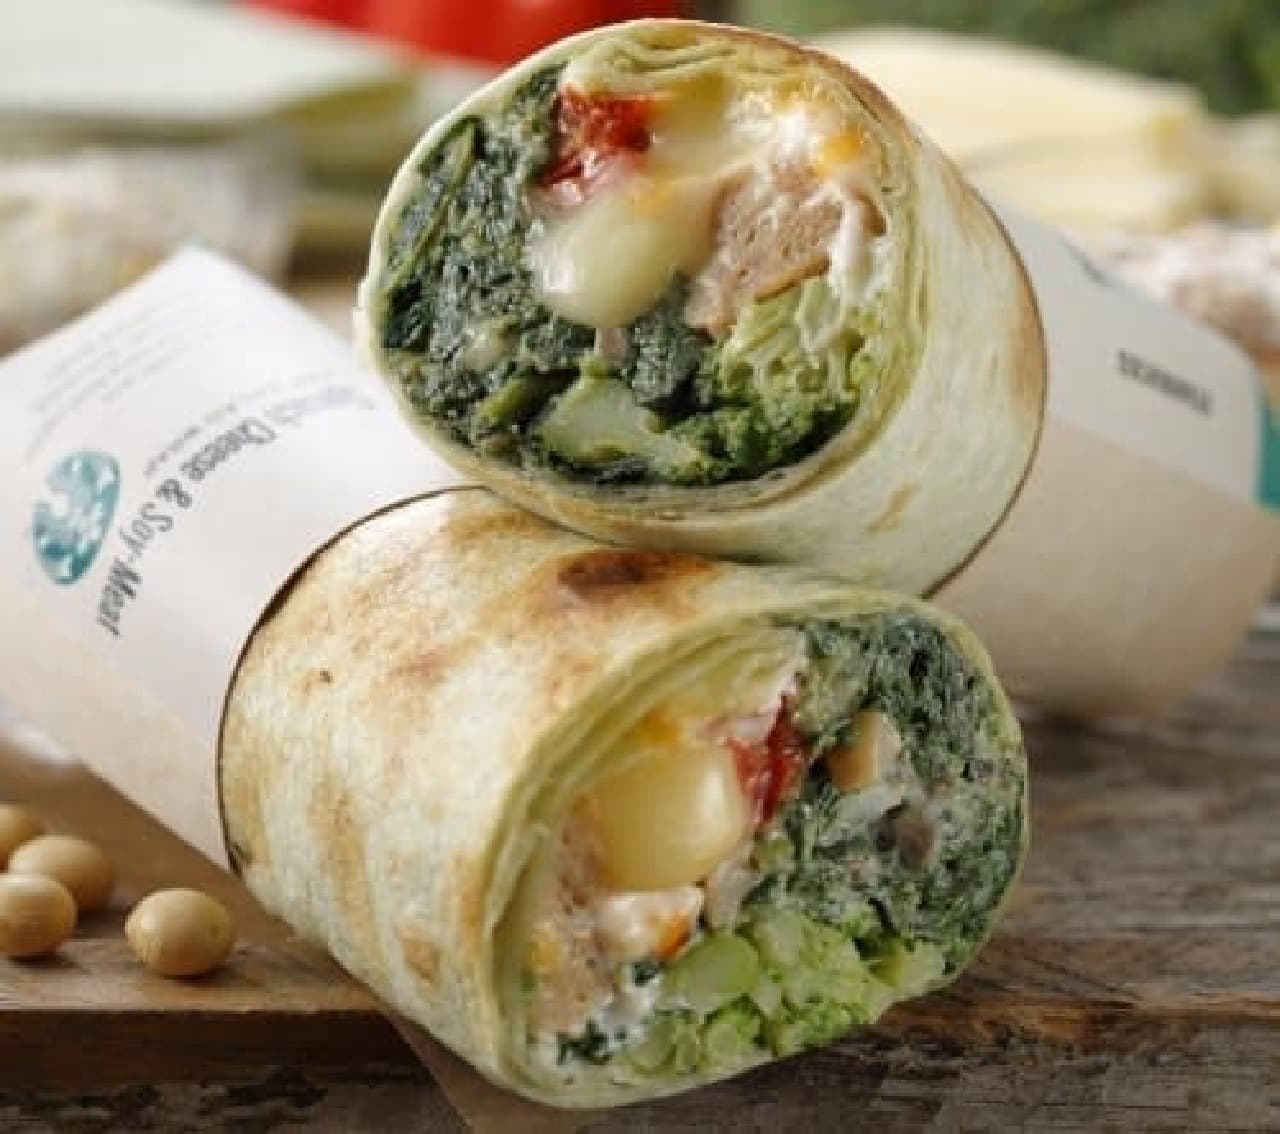 Starbucks "Hot Salad Wrap Spinach & Soy Beans Cheese"